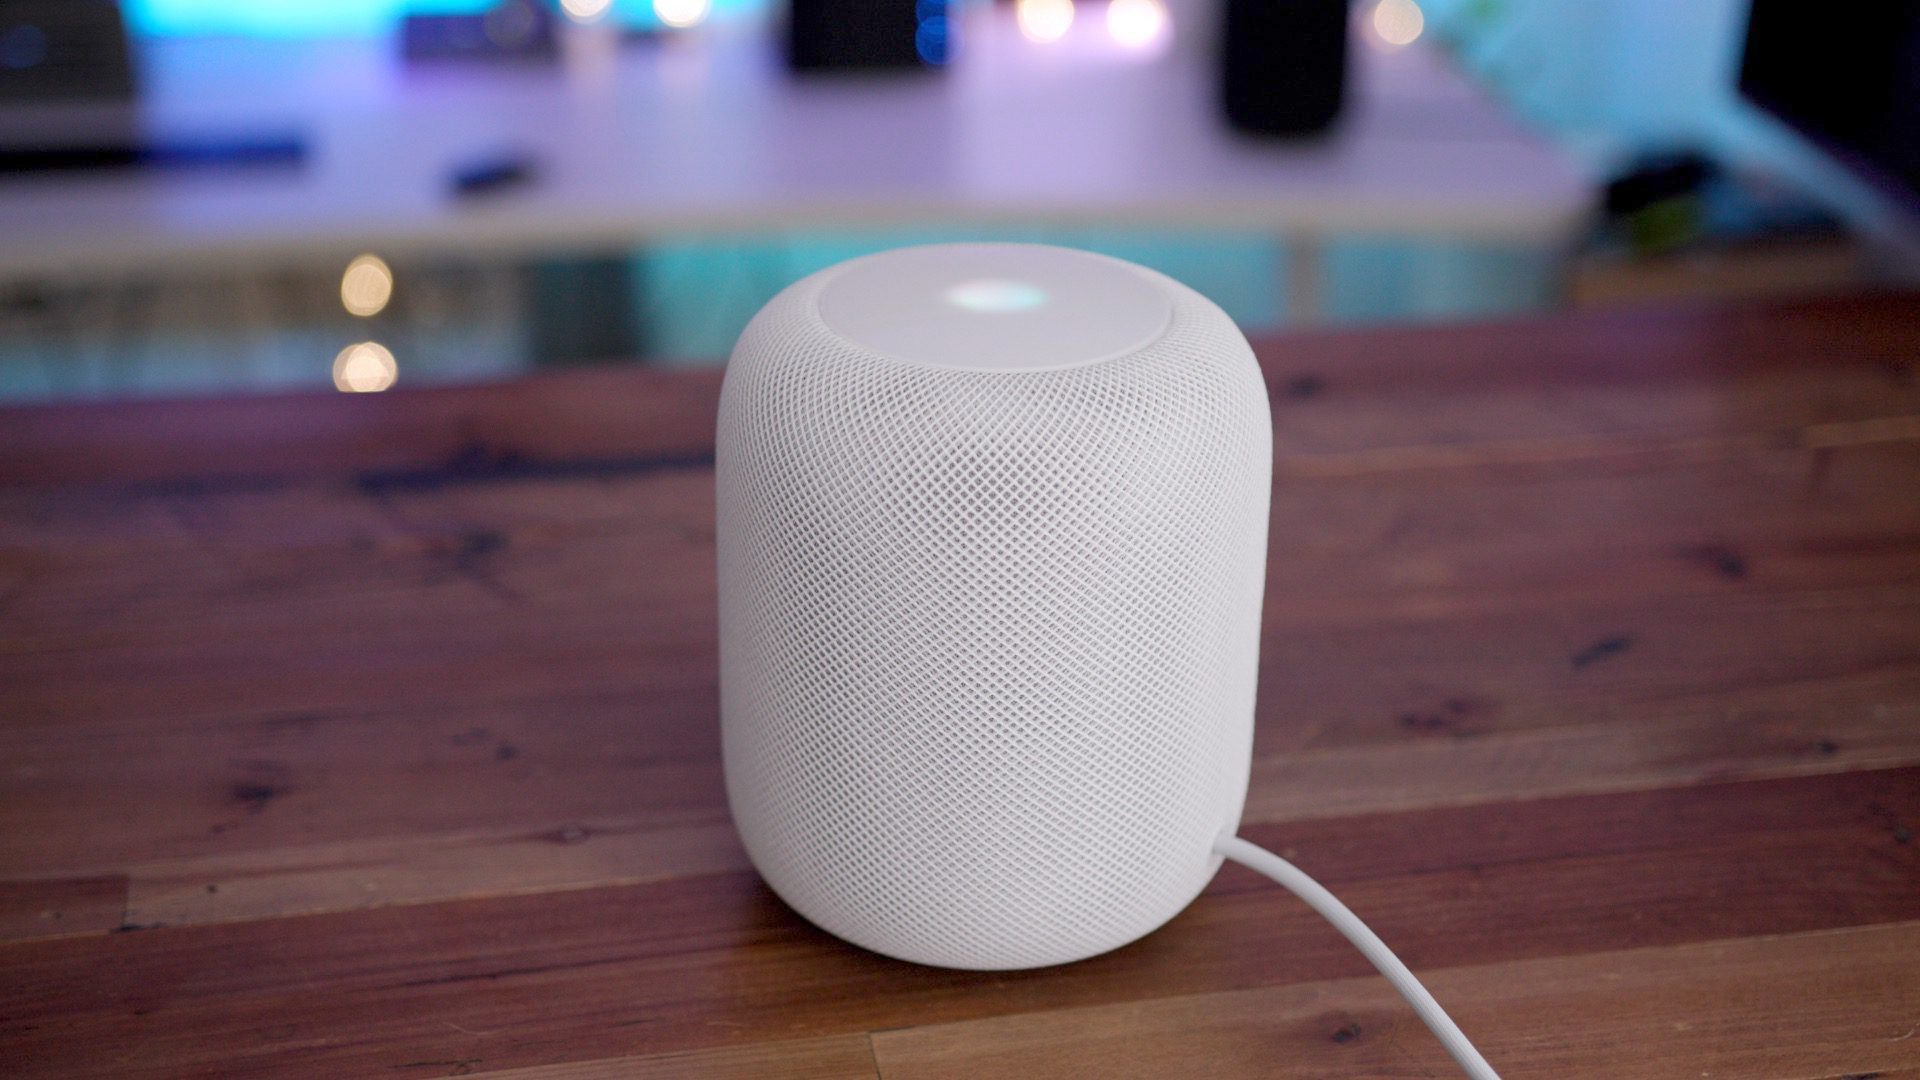 These people should never be allowed near a white HomePod again